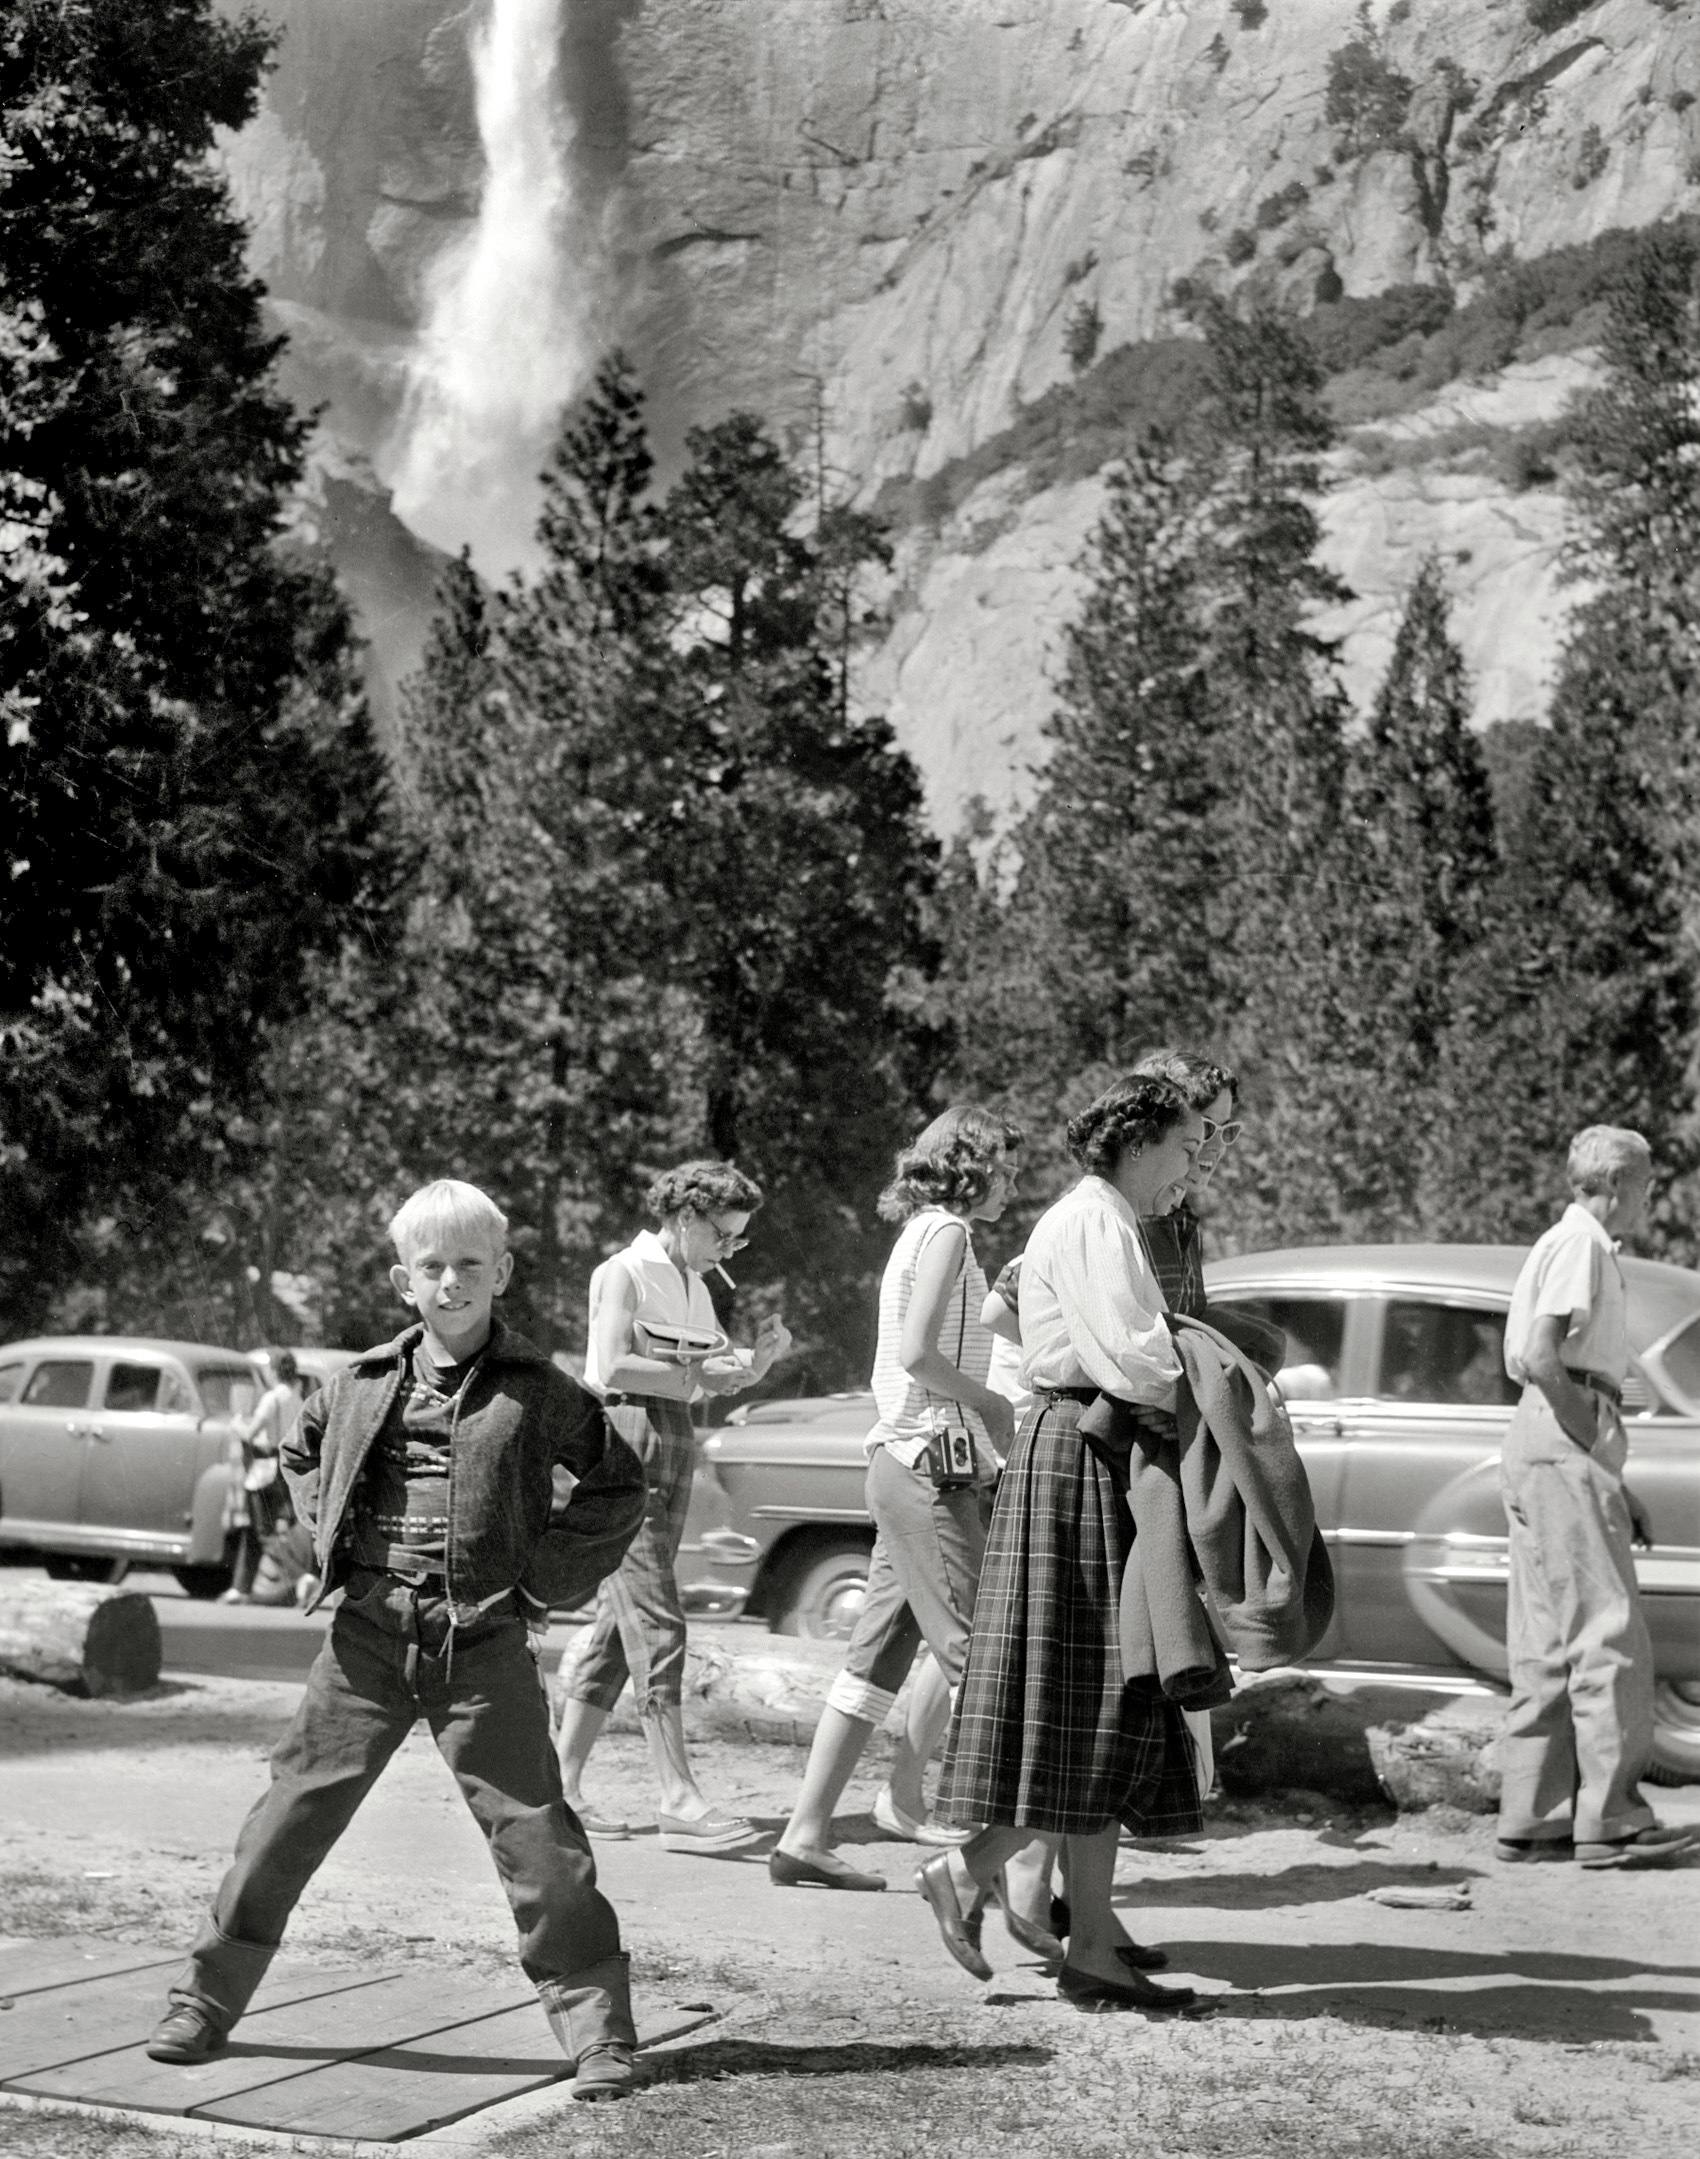 Here we are in Yosemite National Park again, with Bill Bliss standing there on the left. View full size.